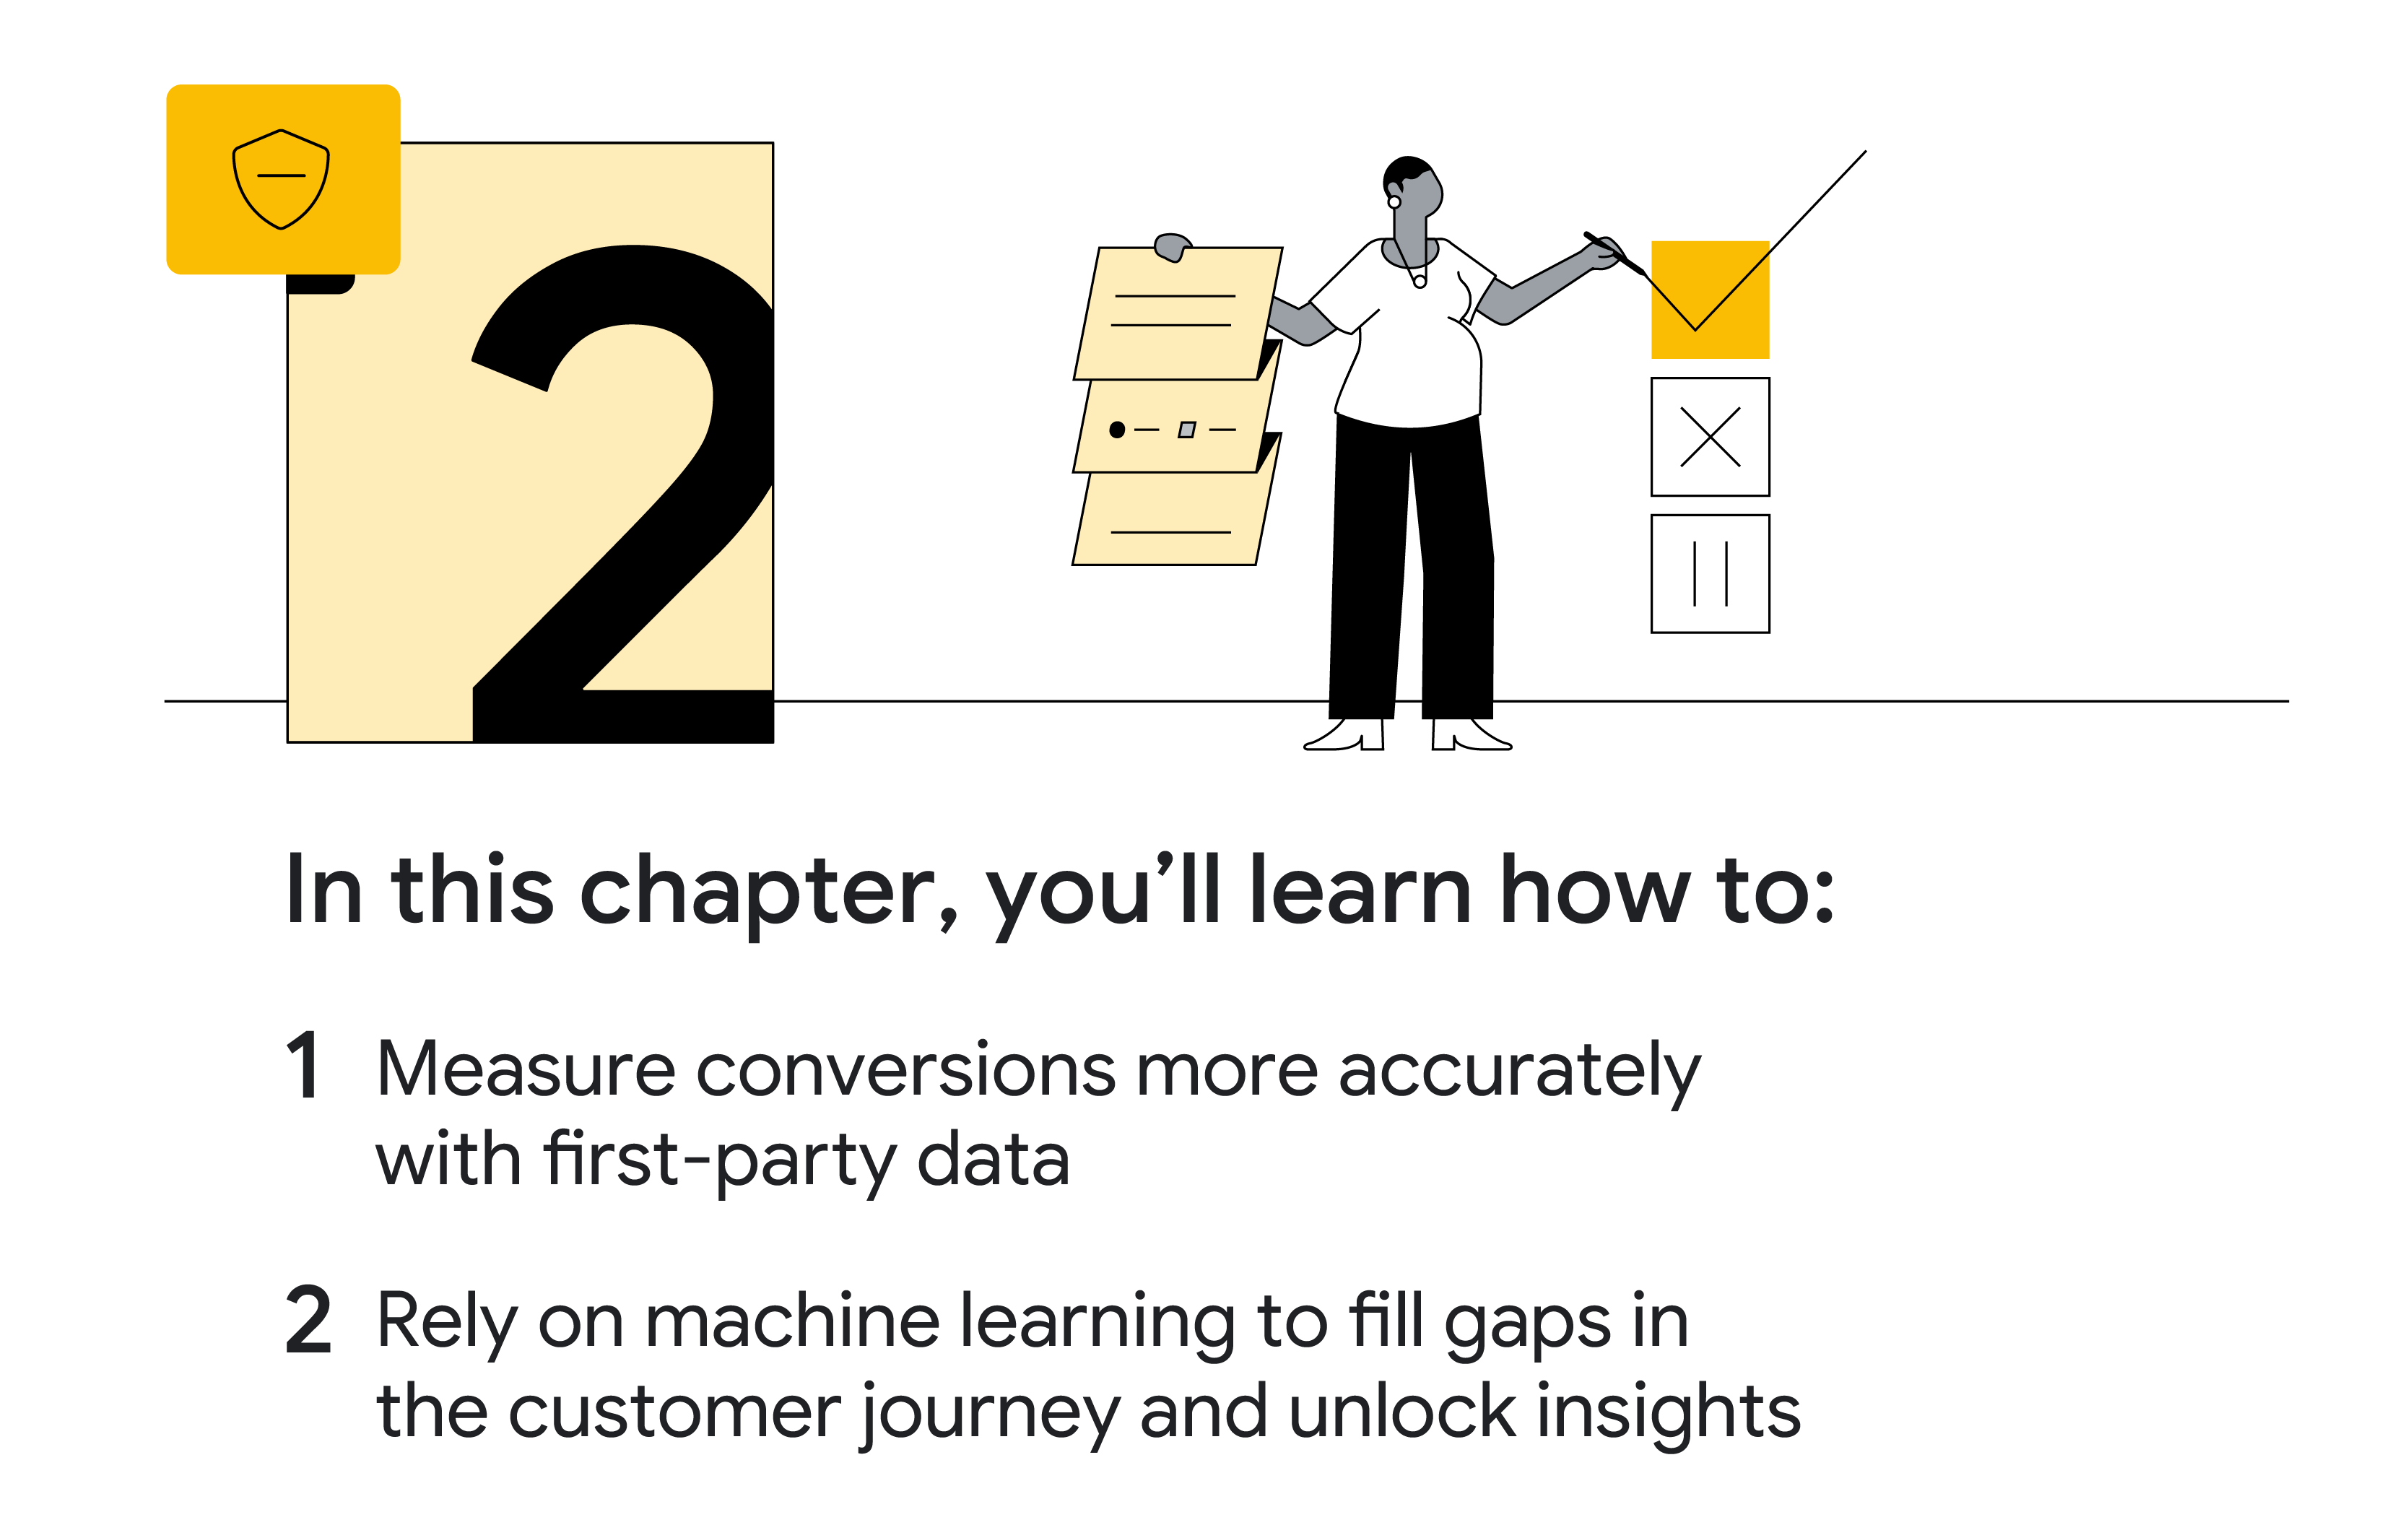 Chapter 2. A pregnant Black woman presents charts and graphs. In this chapter, you’ll learn how to: 1. Measure conversions more accurately with first-party data. 2. Rely on machine learning to fill gaps in the customer journey and unlock insights